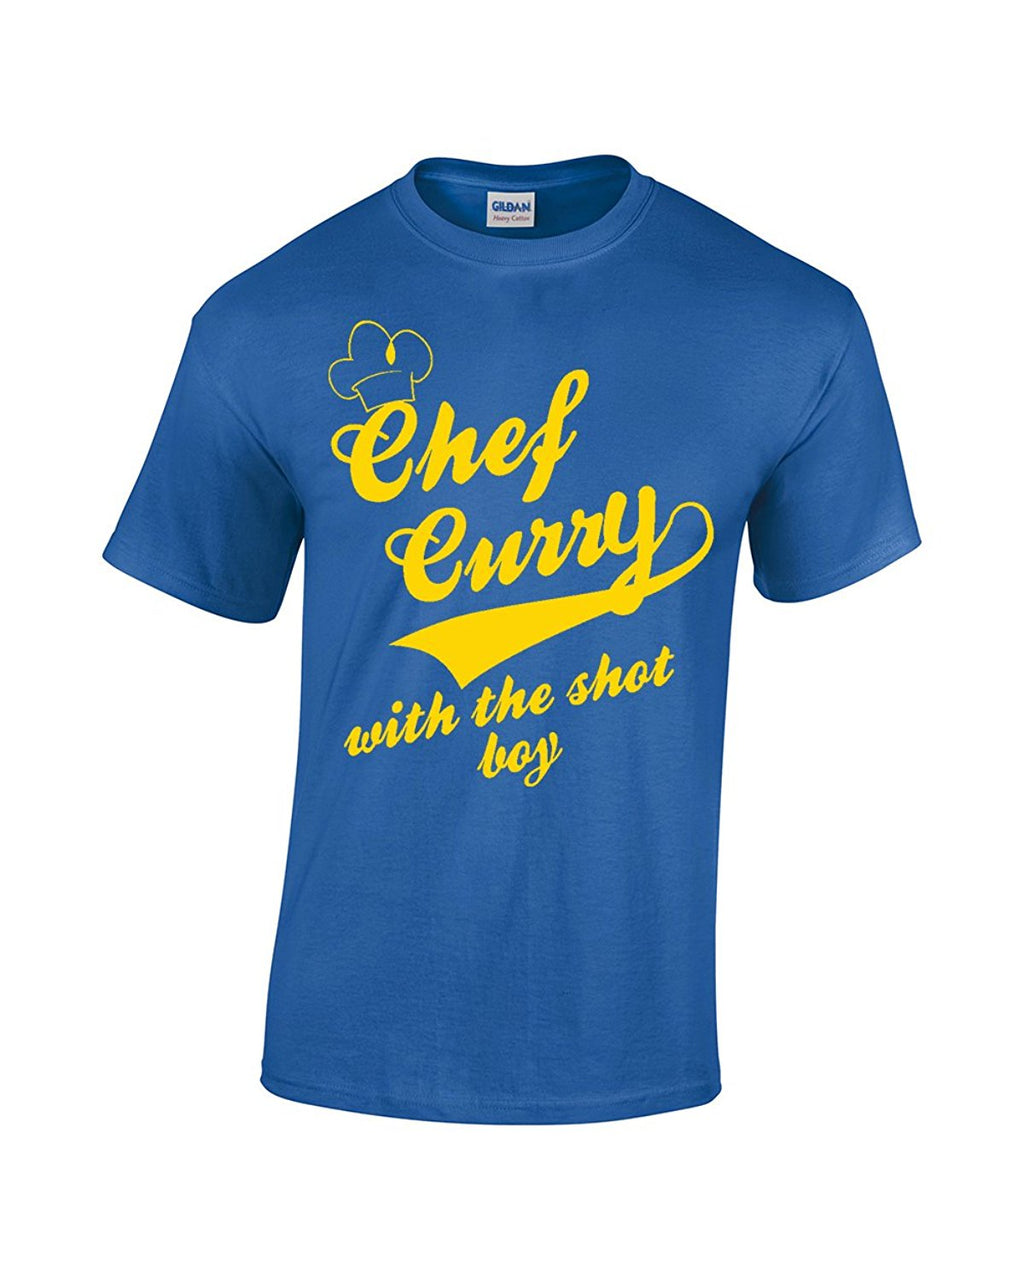 Chef Curry T-Shirt